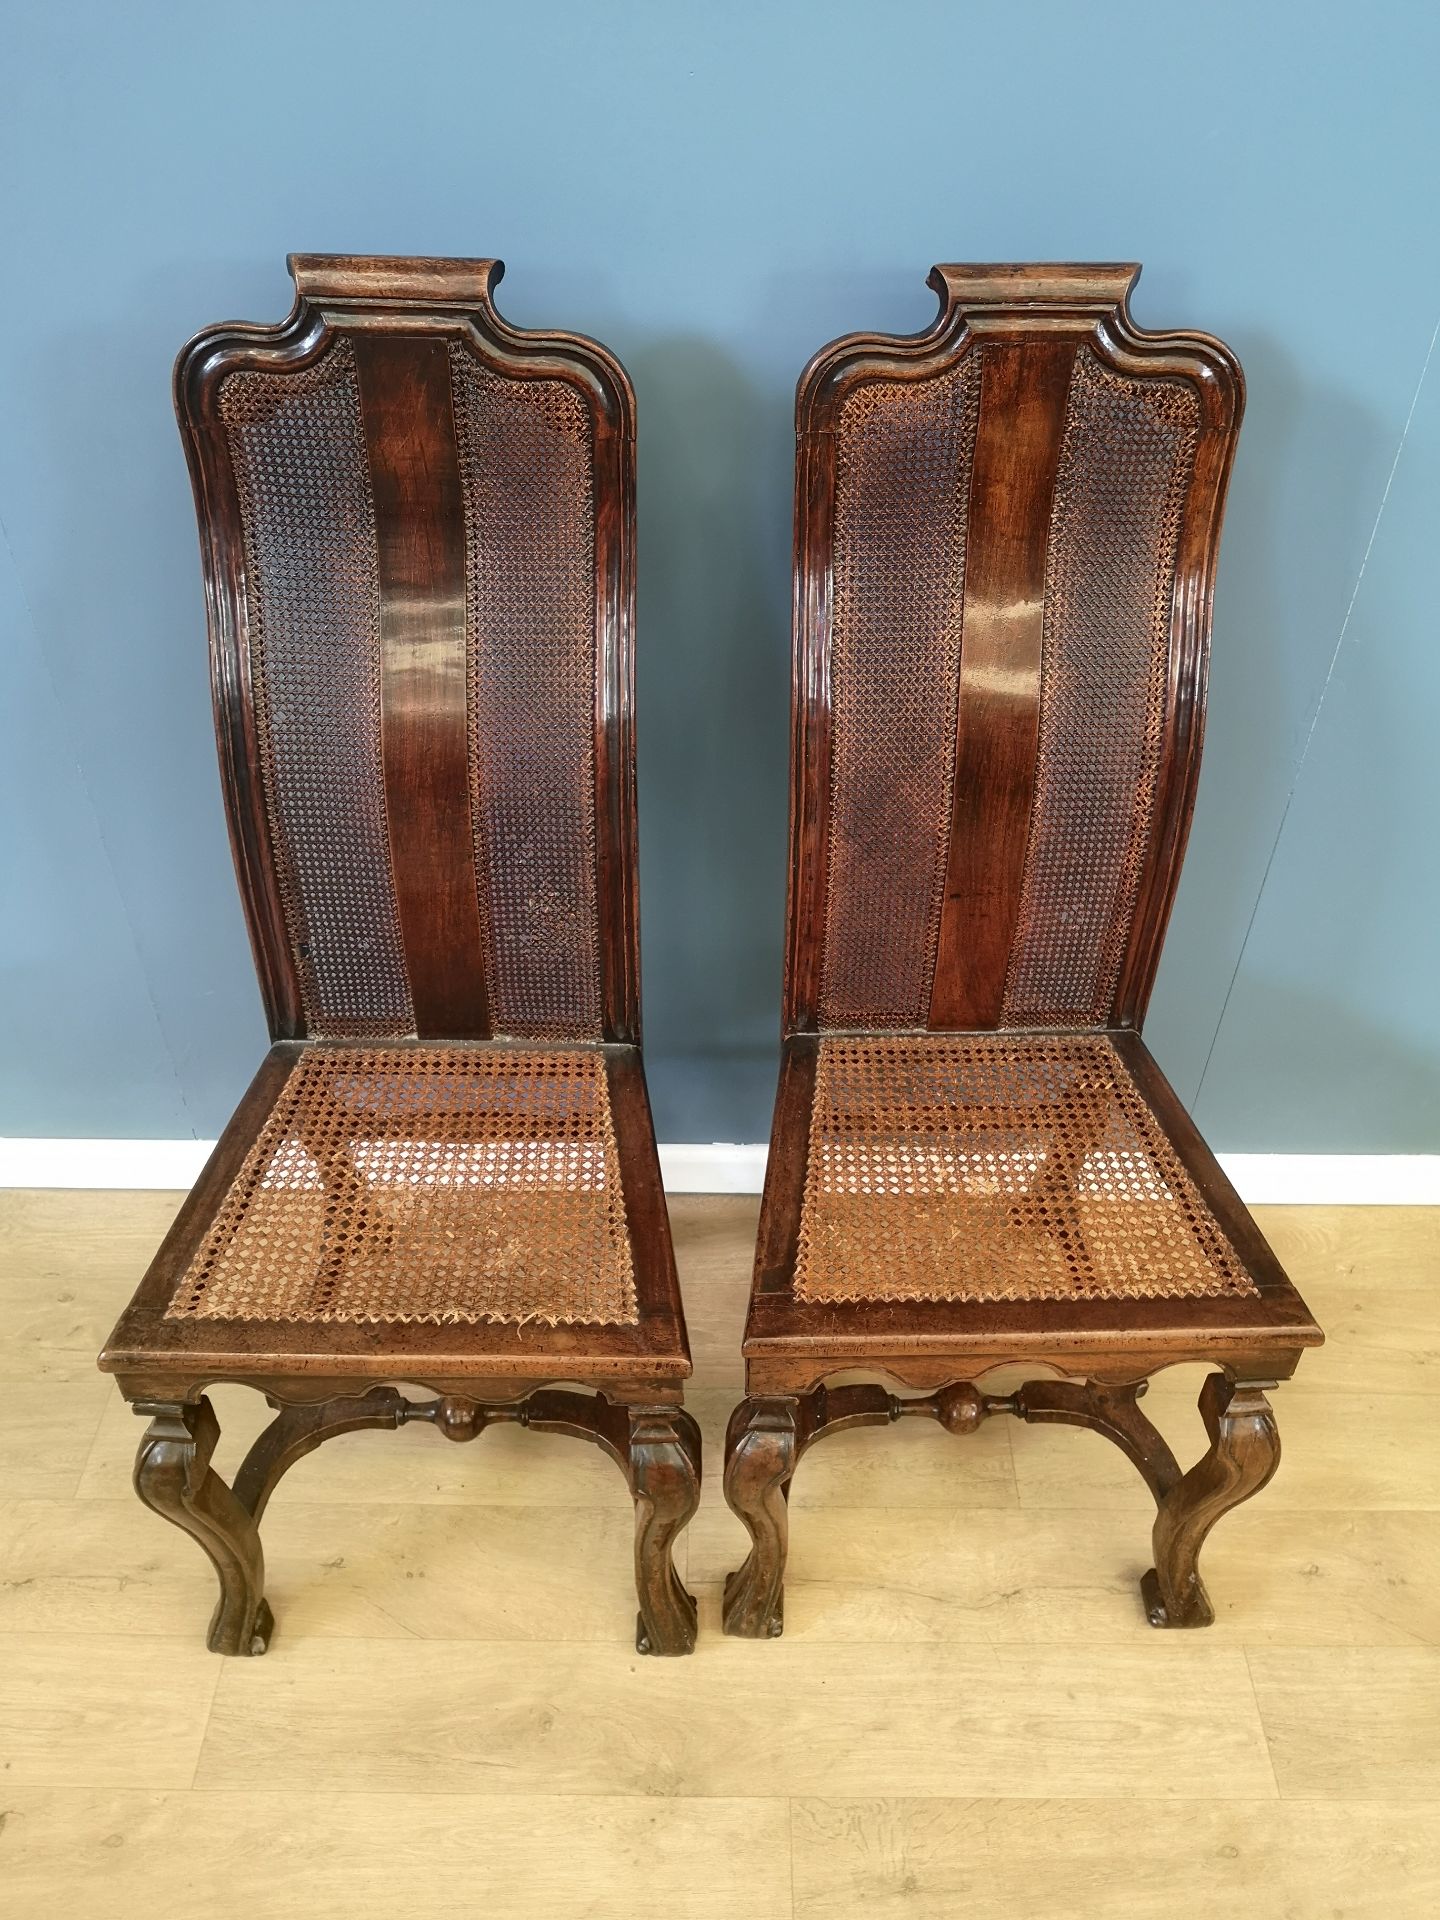 Pair of mahogany and cane chairs - Image 2 of 4